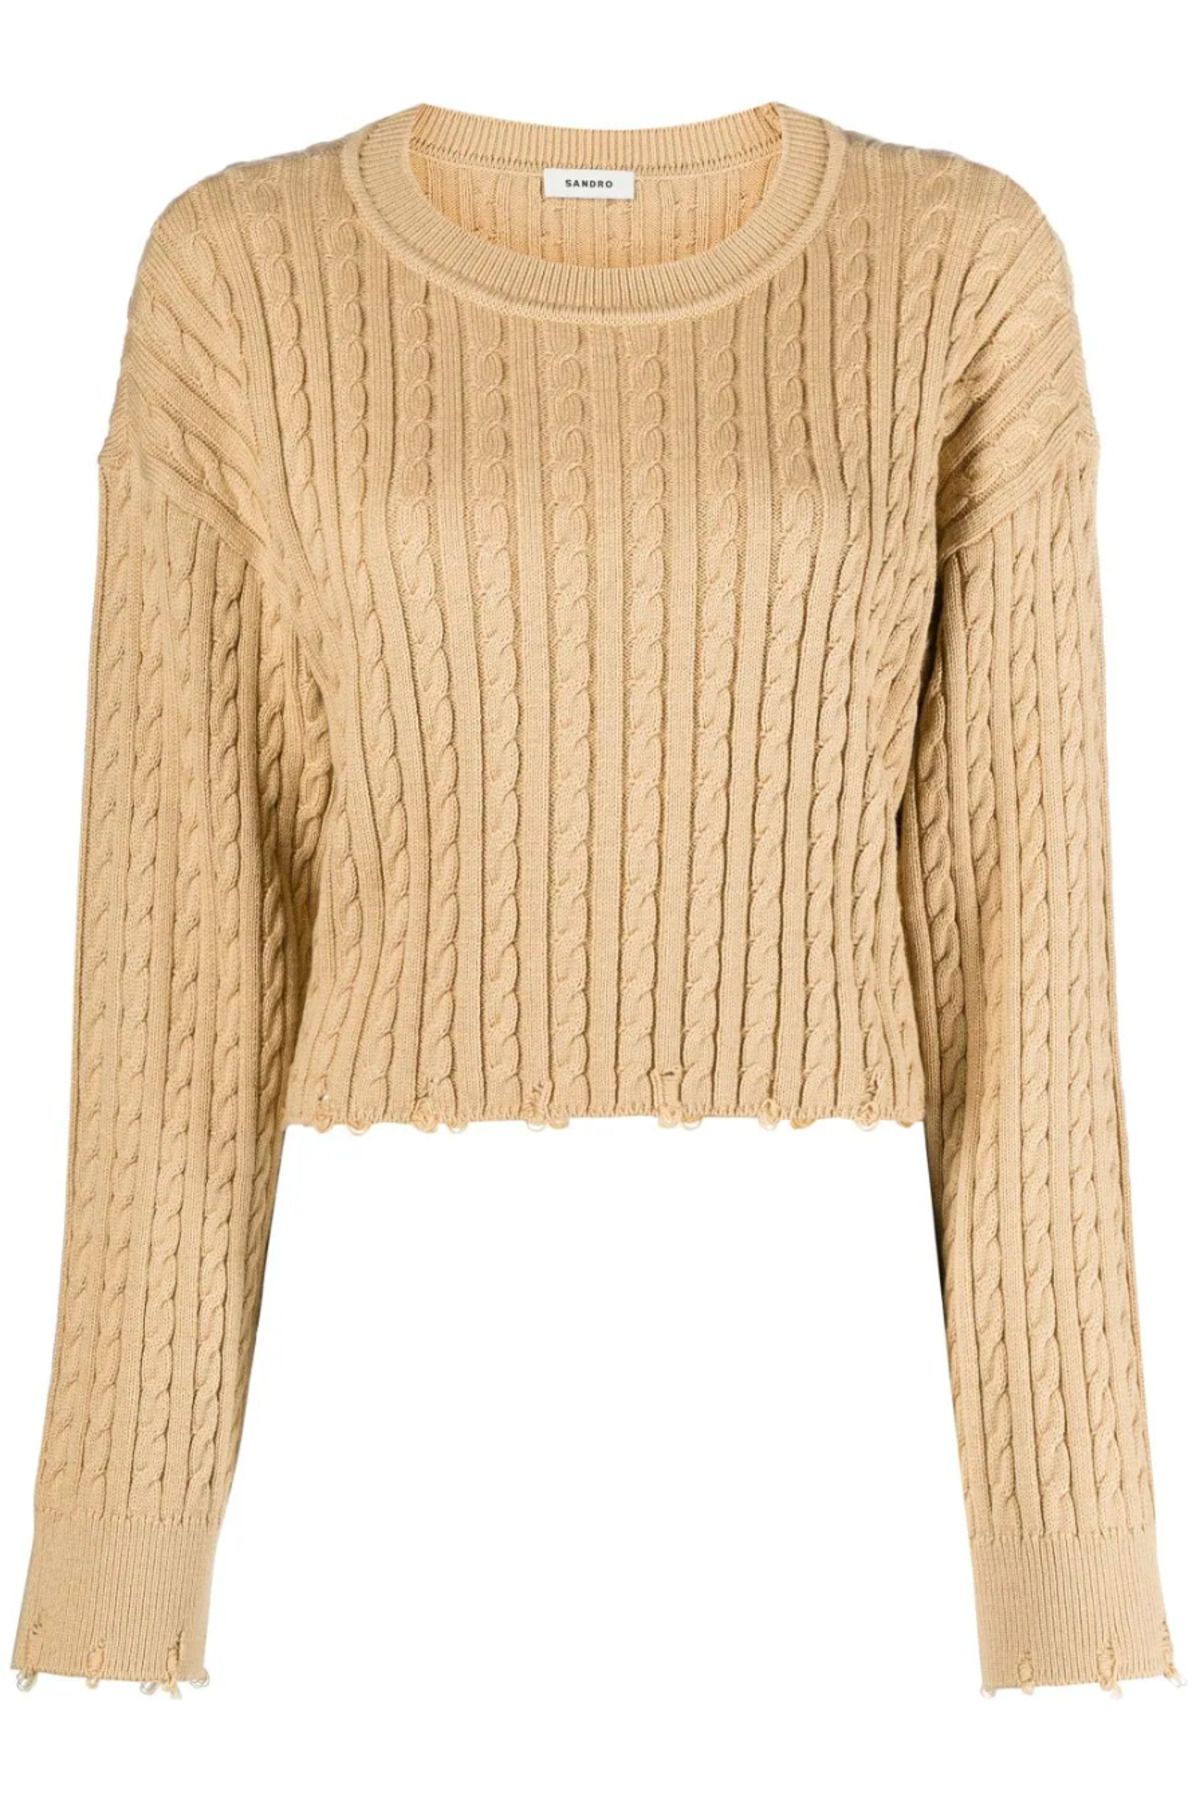 SANDRO Cropped Cable-Knit Sweater